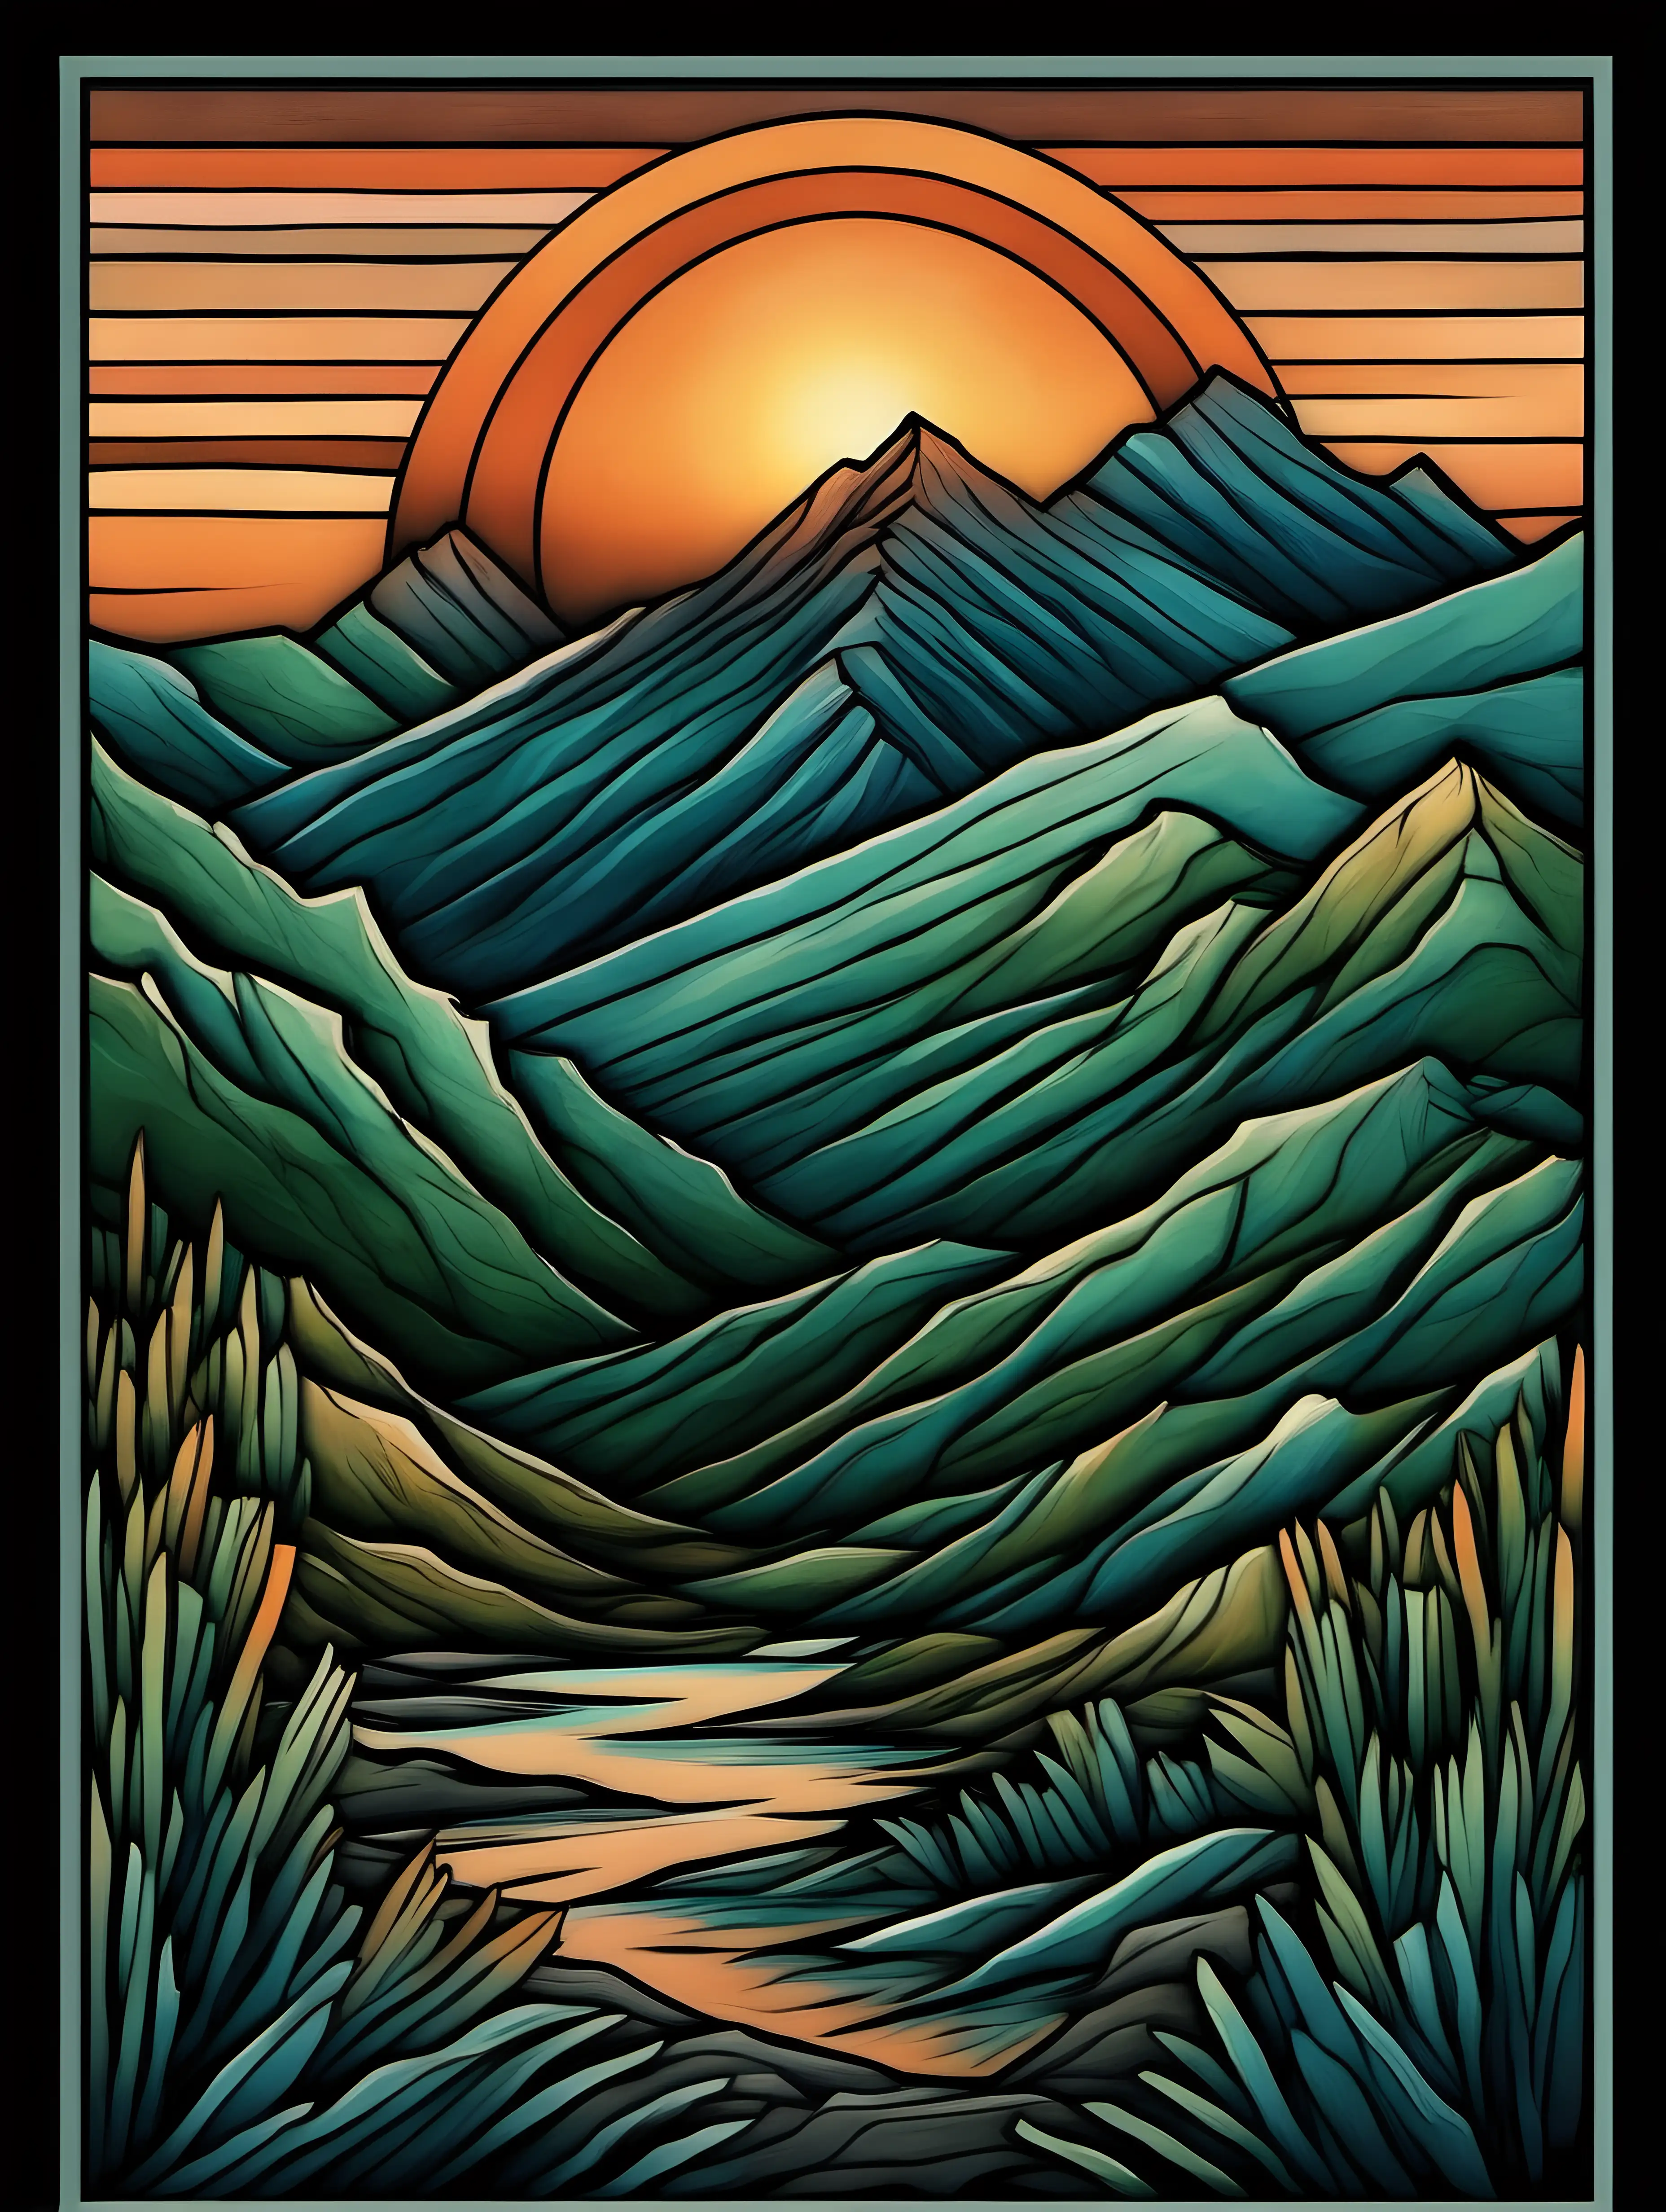 Mountain image, greens, teals, blues, blacks and muted orange for sunset and sunrise, black border
